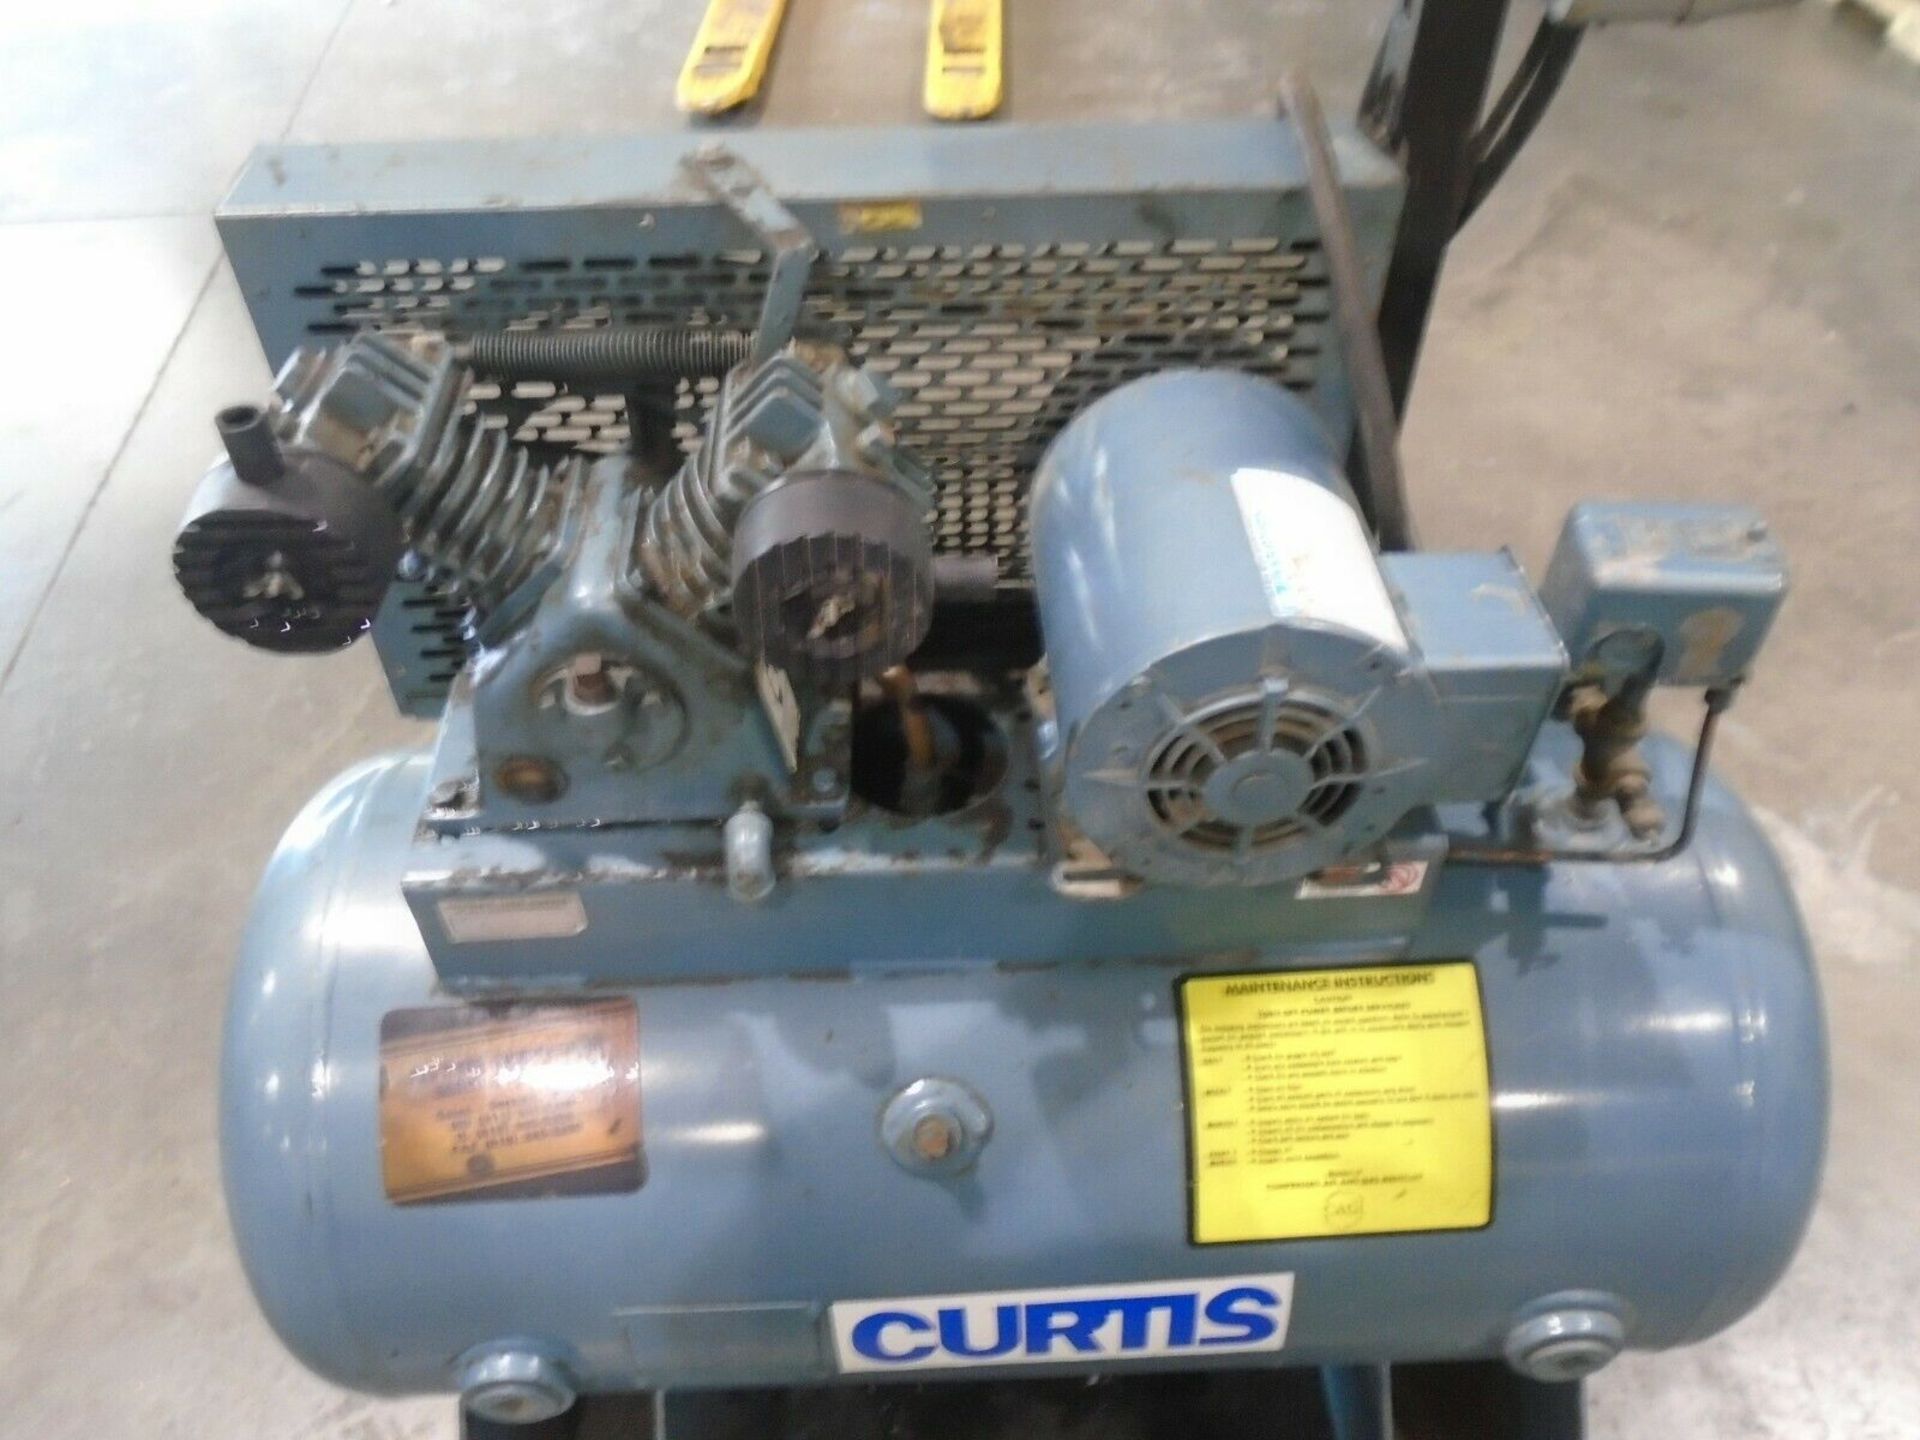 Curtis 3SZ-5-3 Air Compressor 1HP 208 Single or 220/440 3PH - Image 6 of 7